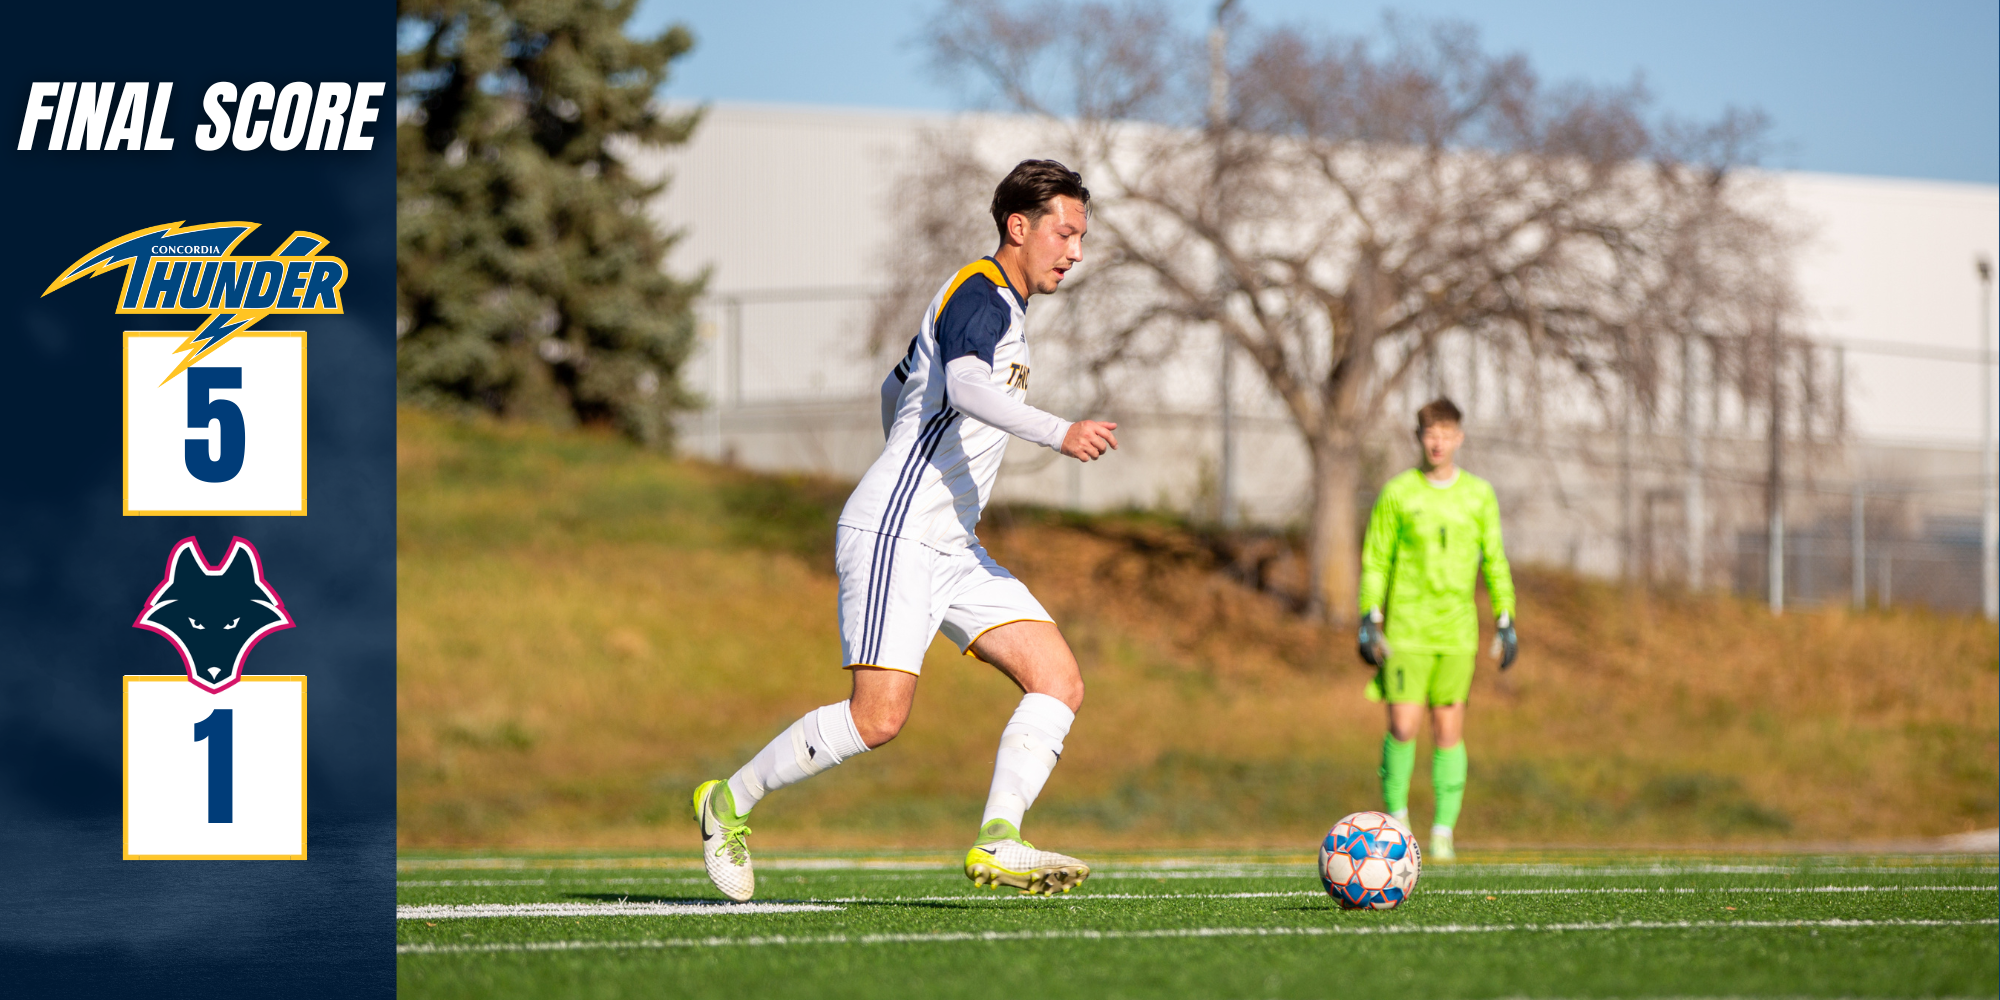 Concordia&rsquo;s Brilliance Shines: Thunder Soccer Team Overpowers NWP Wolves